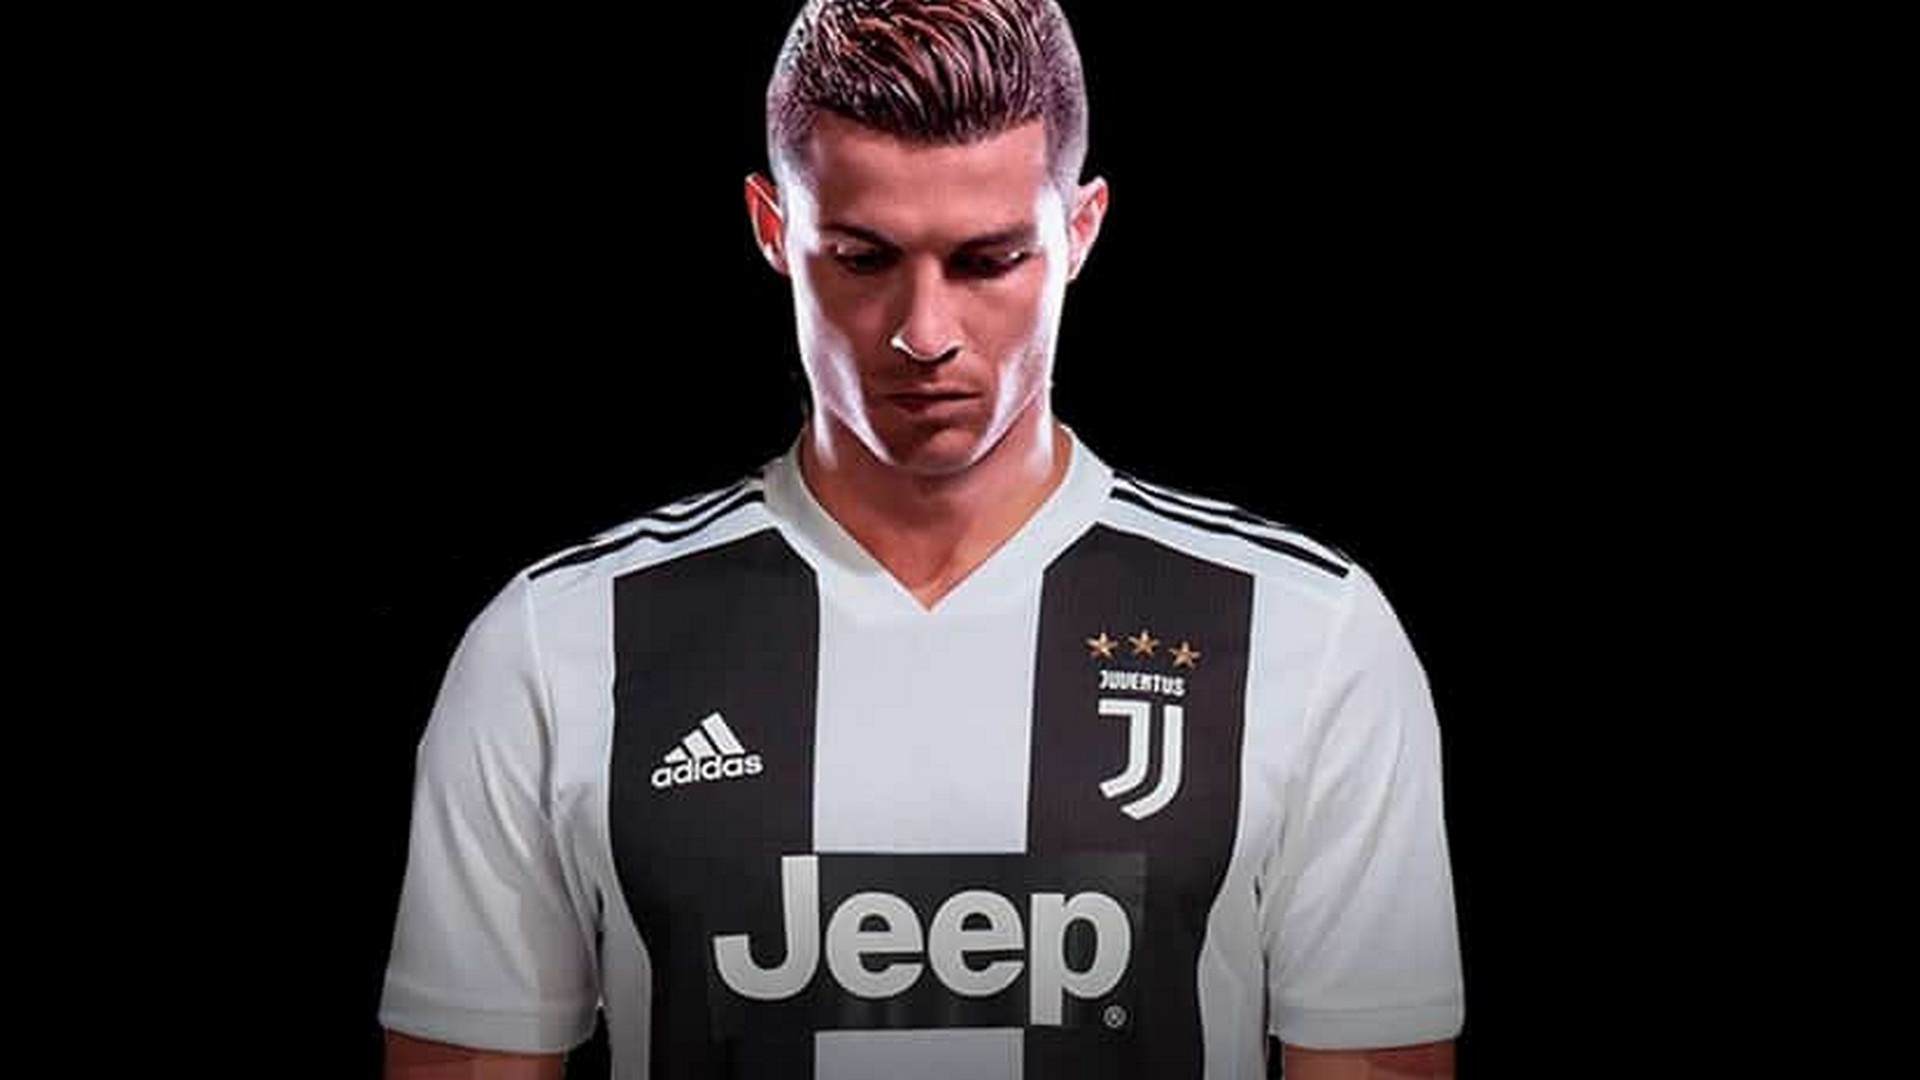 CR7 Juventus Wallpaper For Desktop with image resolution 1920x1080 pixel. You can use this wallpaper as background for your desktop Computer Screensavers, Android or iPhone smartphones